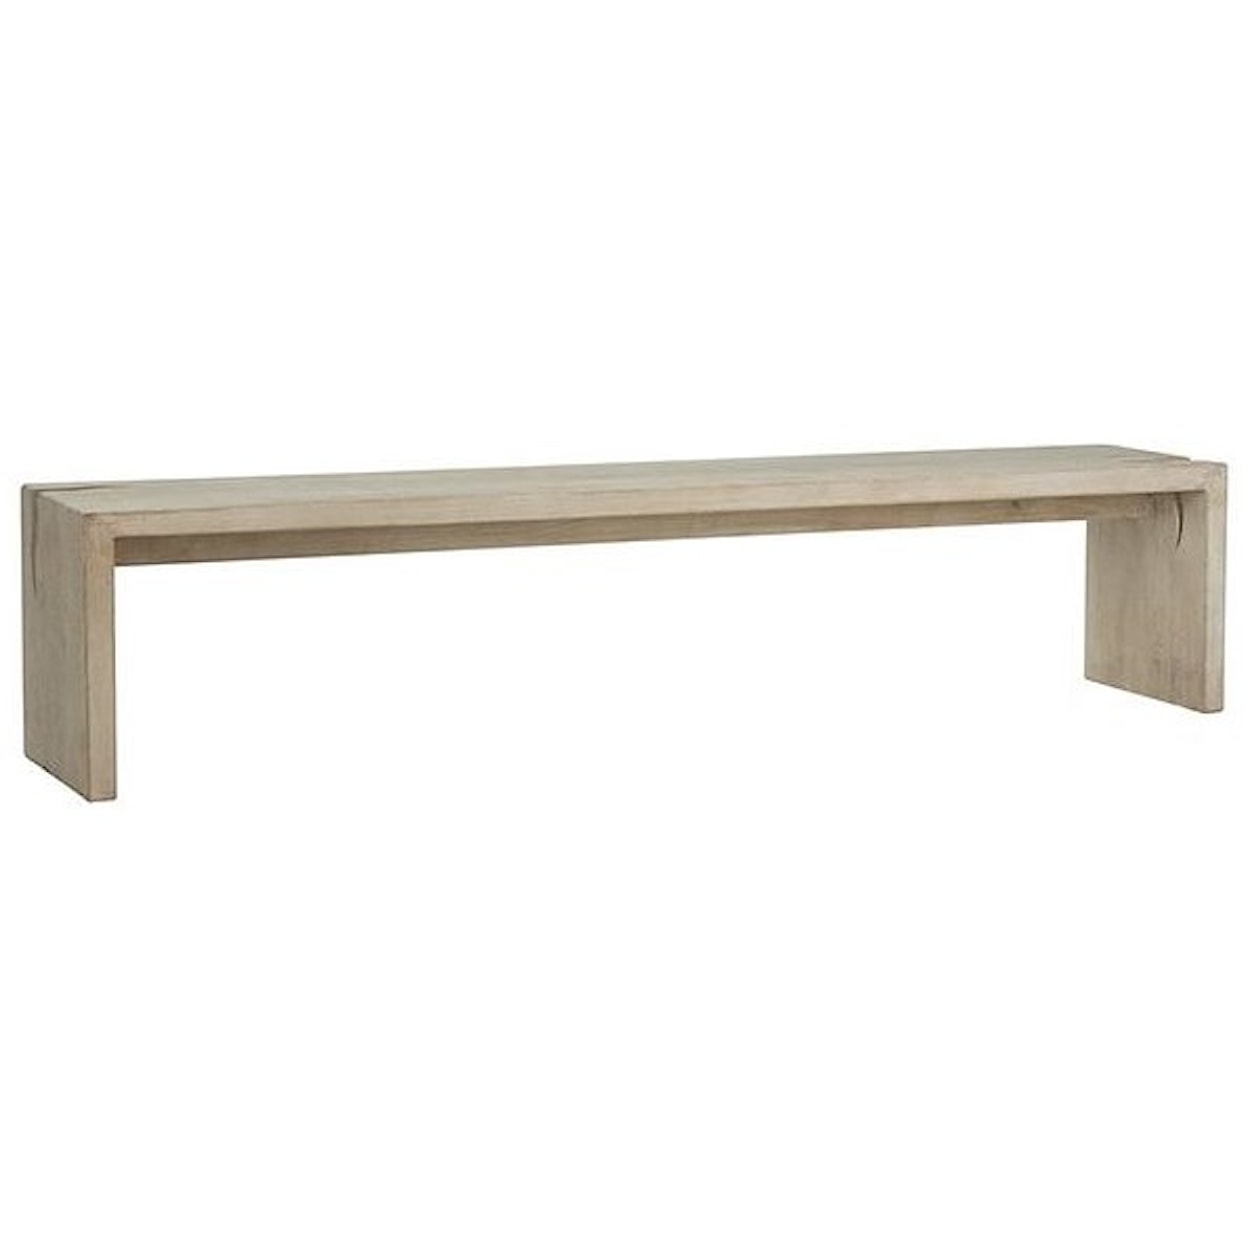 Dovetail Furniture Benches Merwin Bench